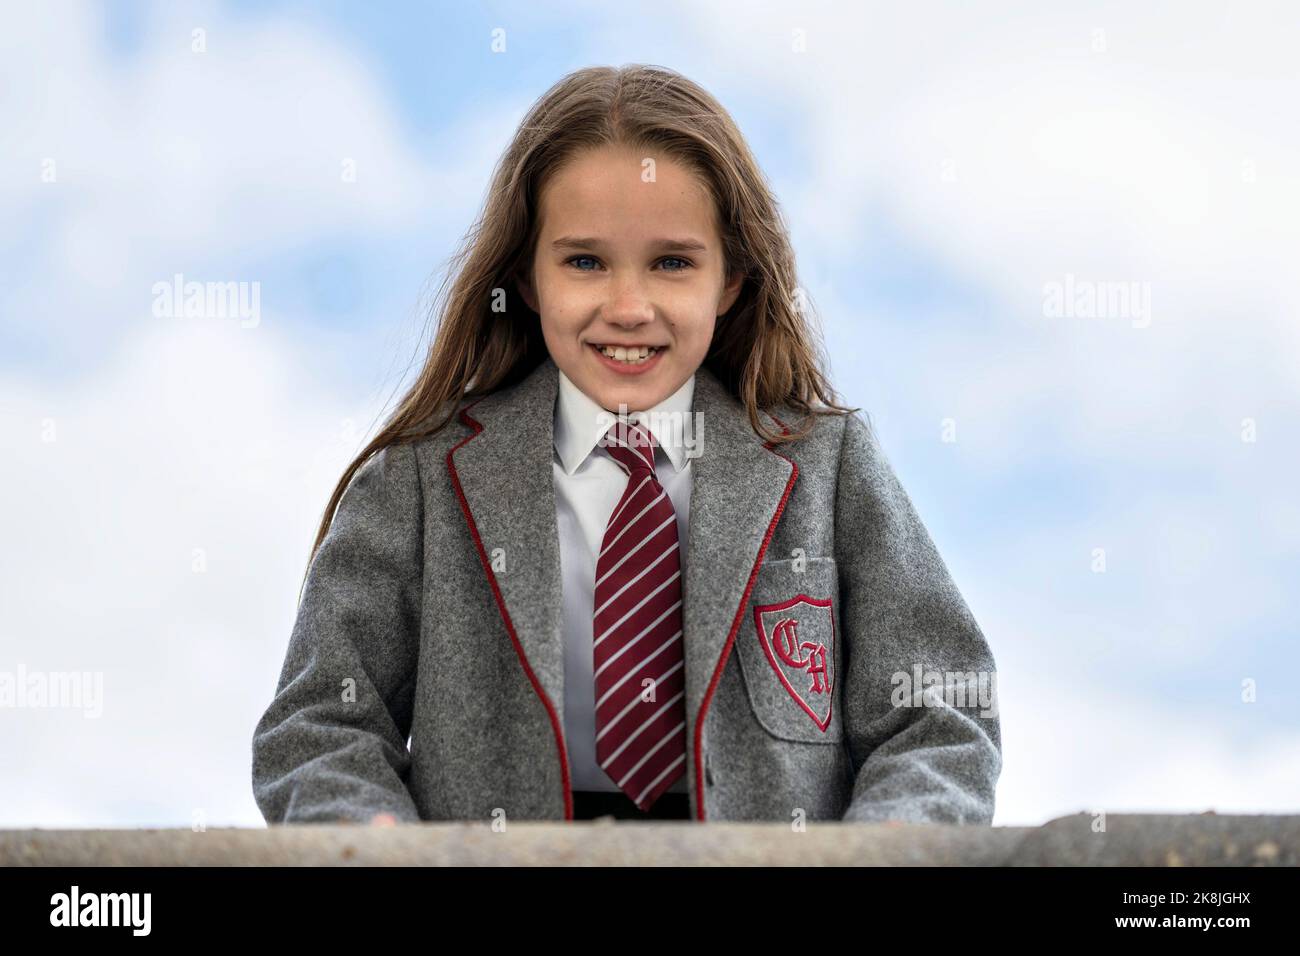 ALISHA WEIR in ROALD DAHL'S MATILDA THE MUSICAL (2022), directed by MATTHEW WARCHUS. Credit: Working Title Films / Album Stock Photo